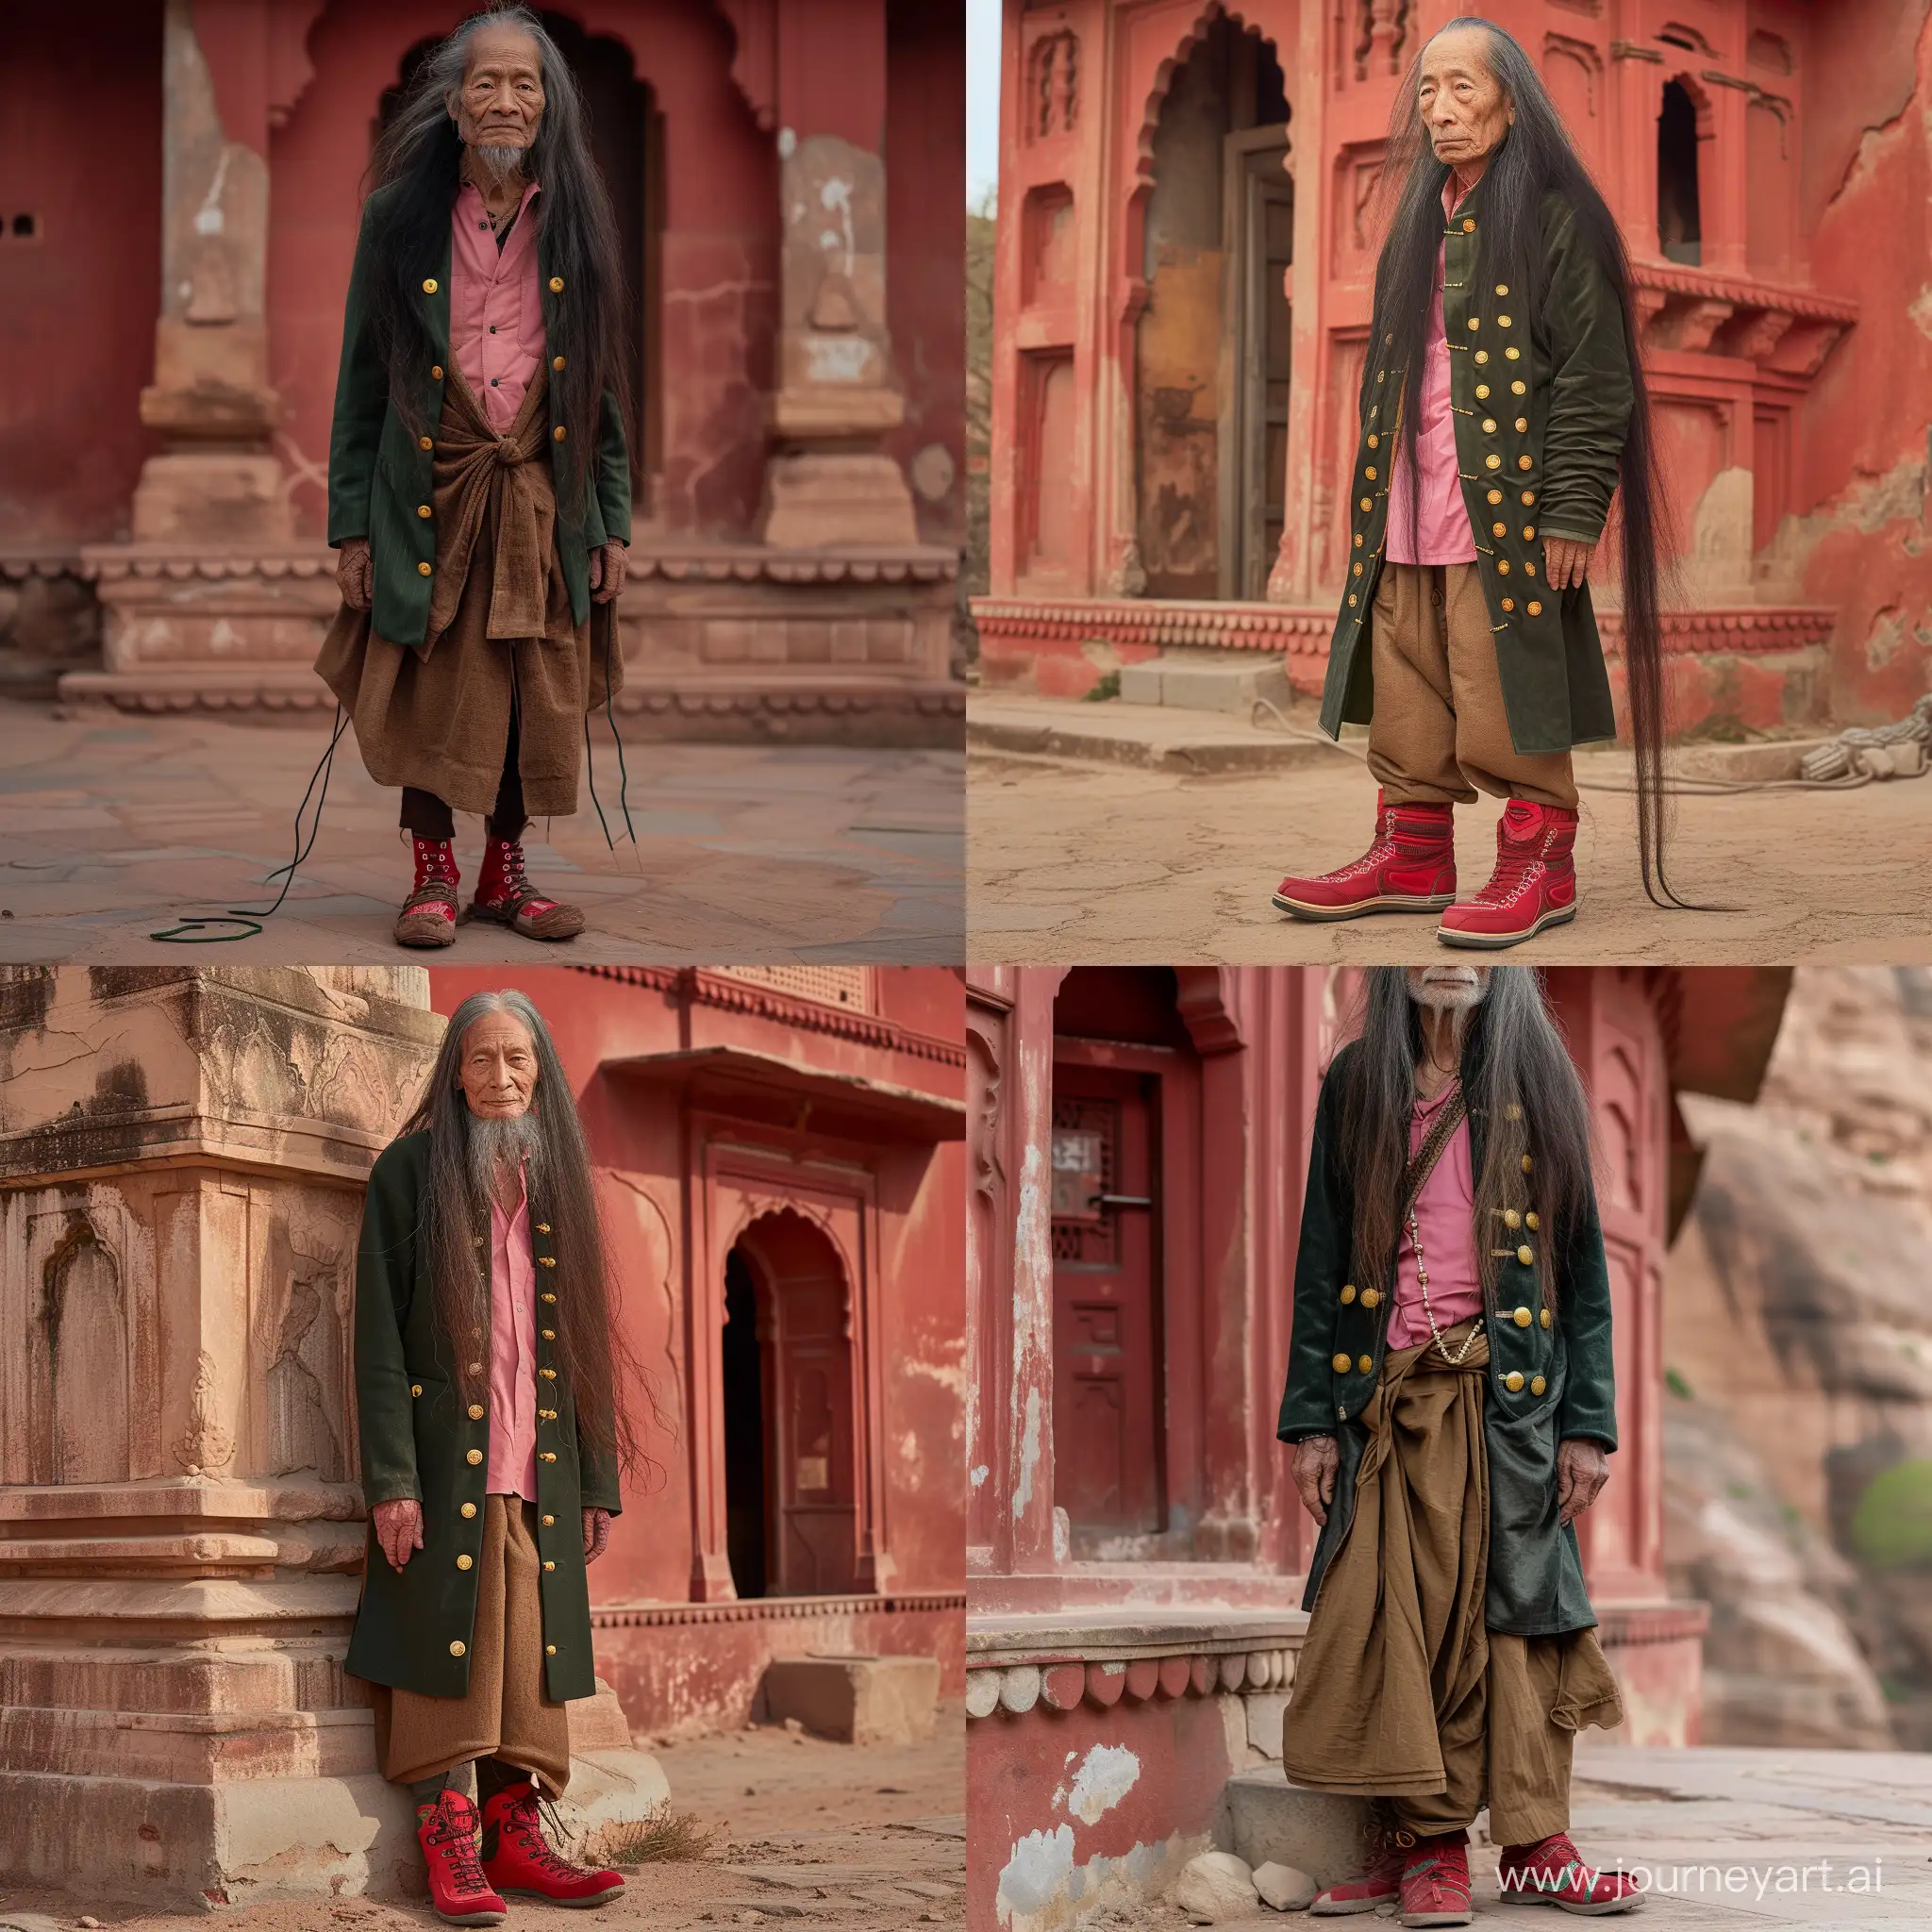    a very thin 80 years old japanees man long hair wearing a dark green jacket   with golden buttons a pink shirt  and a brown cloth   and red mountain shoes standing before light 
 old red rajasthan   building  total body softlicht and contrast 50mm fuji xt4 fotorealistisch